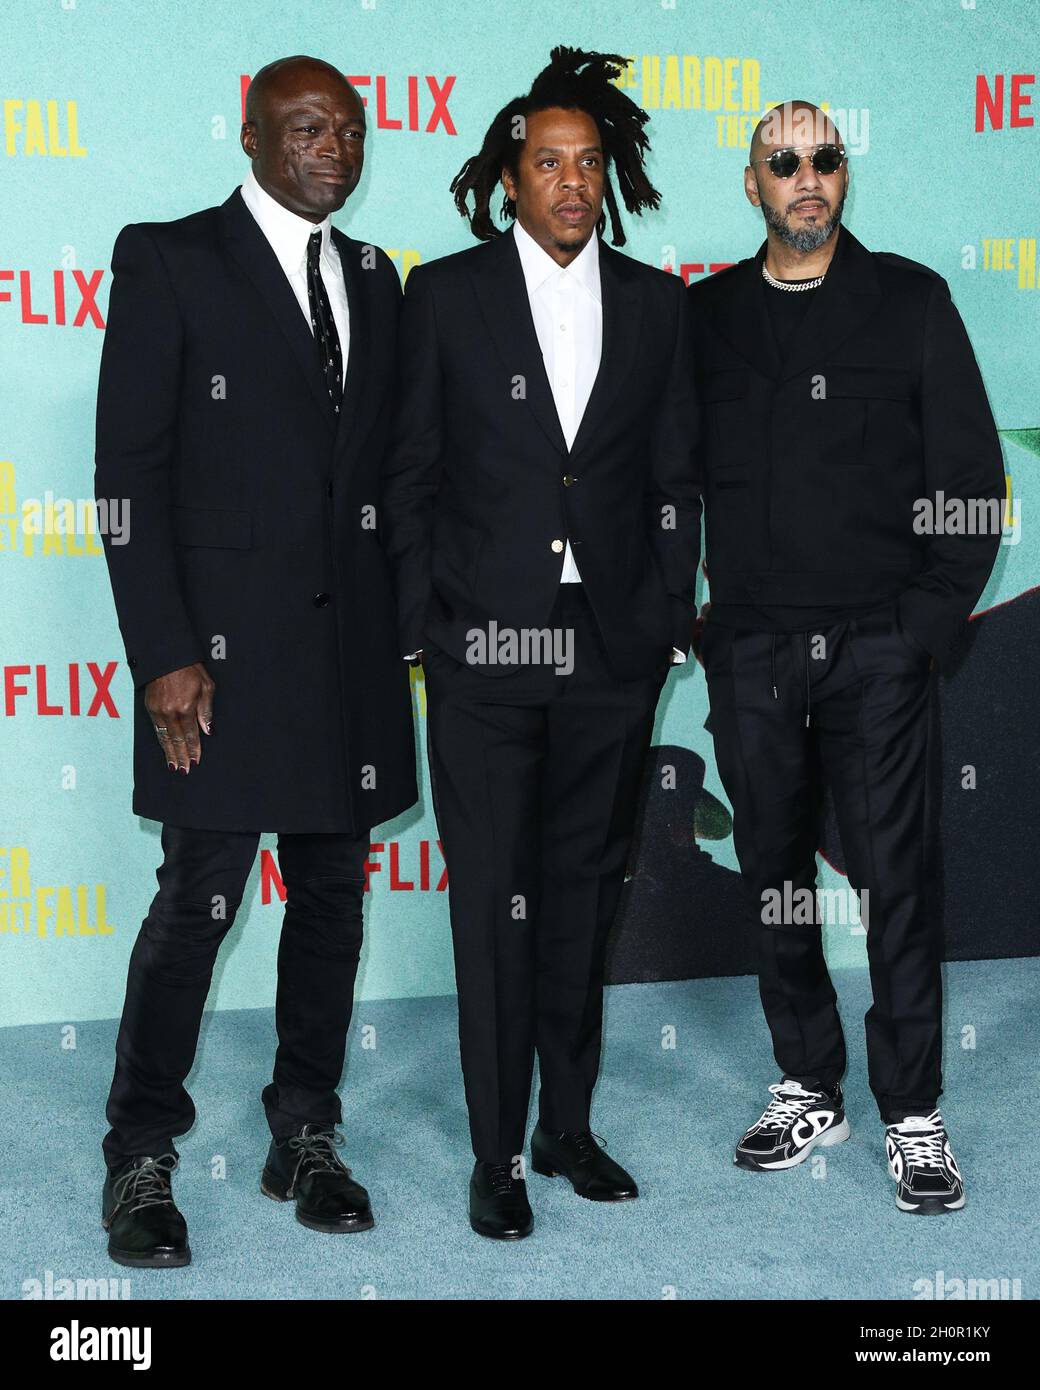 LOS ANGELES, CALIFORNIA, USA - OCTOBER 13: Singer-songwriter Seal (Henry Olusegun Adeola Samuel), rapper/producer Jay-Z (Shawn Corey Carter) and record producer Swizz Beatz (Kasseem Daoud Dean) arrive at the Los Angeles Premiere Of Netflix's 'The Harder They Fall' held at the Shrine Auditorium and Expo Hall on October 13, 2021 in Los Angeles, California, United States. (Photo by Xavier Collin/Image Press Agency) Stock Photo